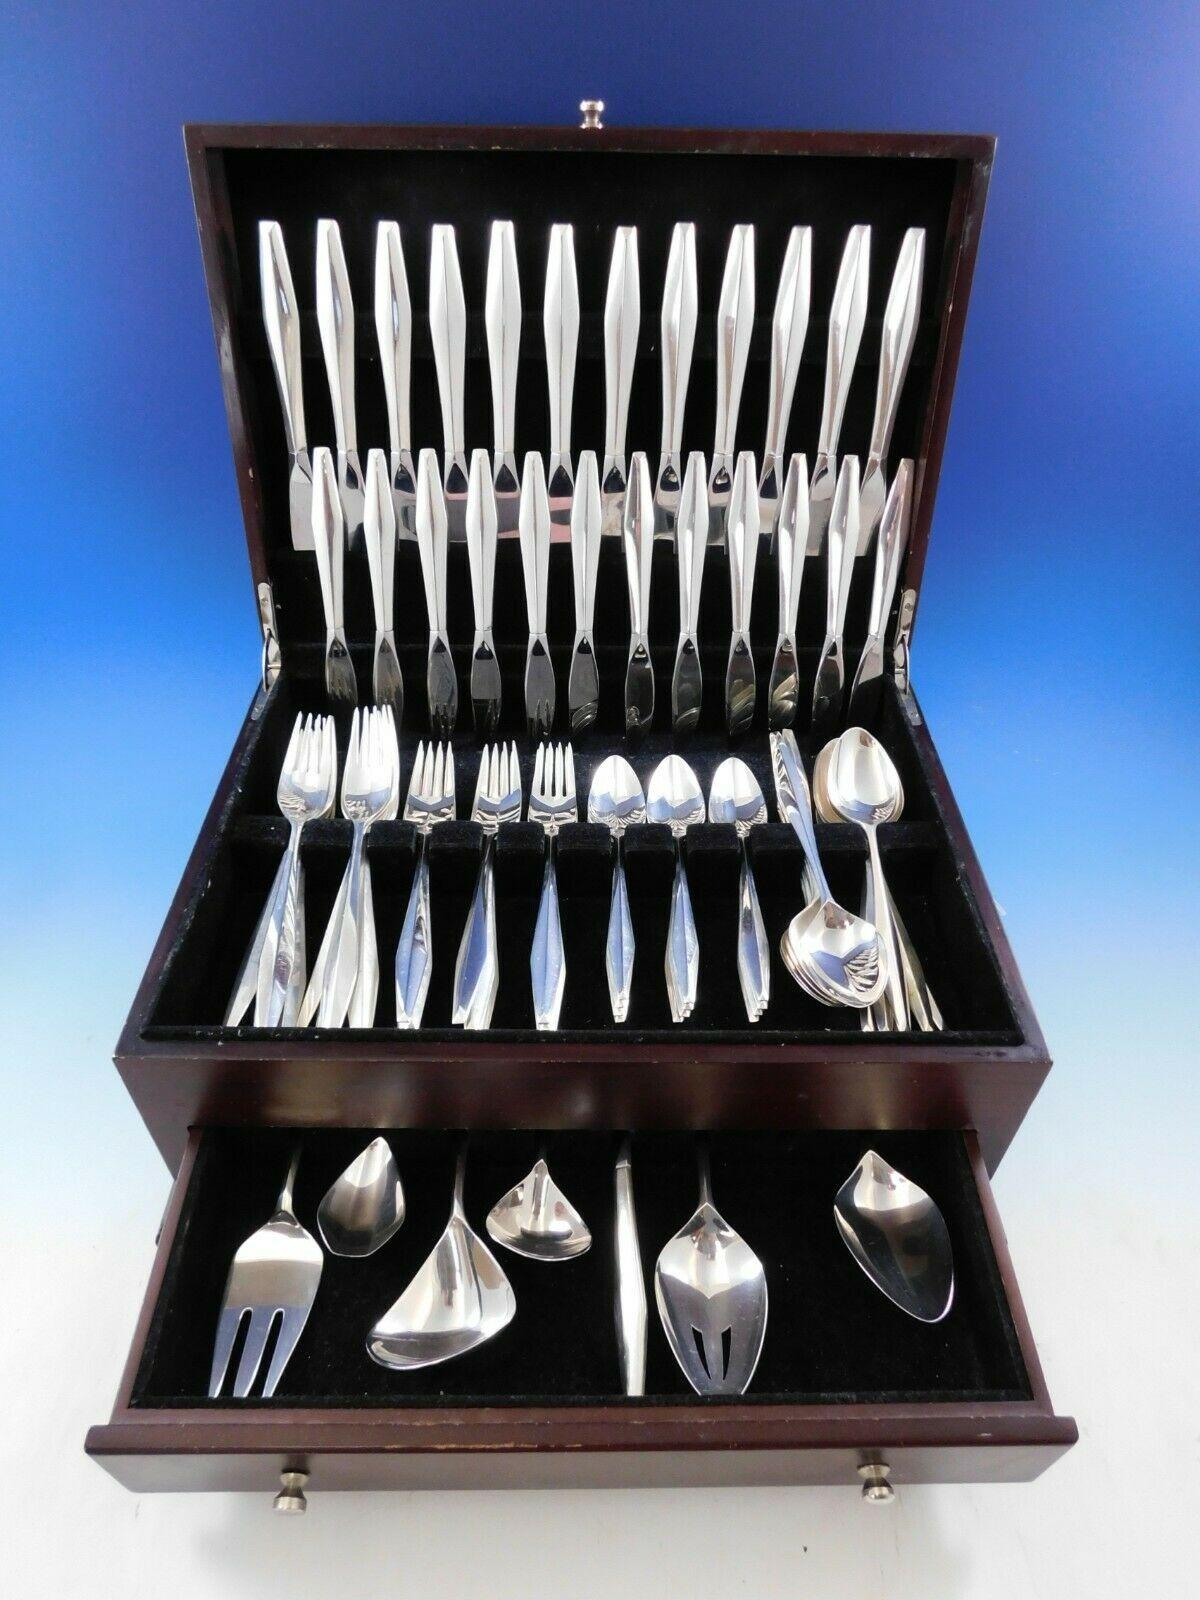 The Diamond pattern was designed by internationally renowned Italian architect and designer Gio Ponti and introduced by Reed & Barton in the year 1958. This is our best selling Mid-Century Modern flatware pattern.

Diamond by Reed & Barton